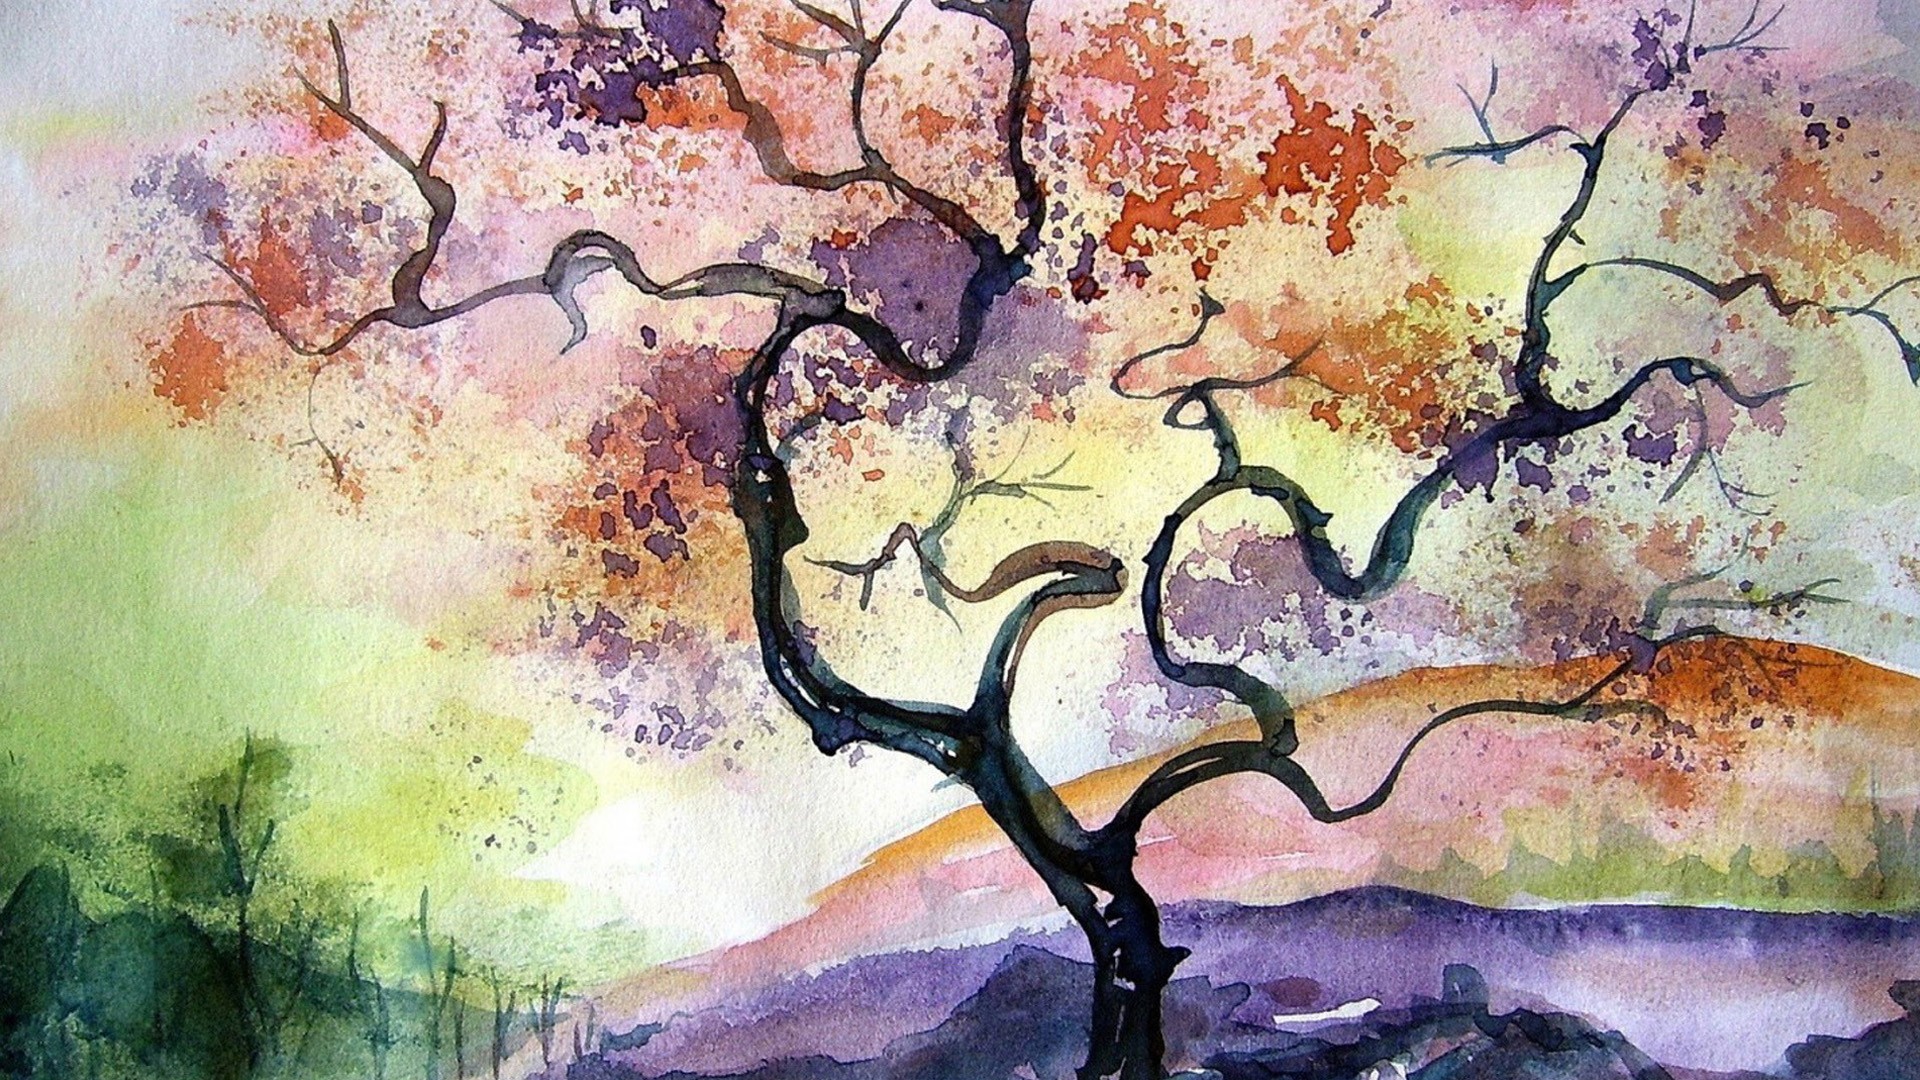 painting, Watercolor, Artwork, Warm colors, Nature, Landscape, Trees, Colorful, Hills, Cherry blossom Wallpaper